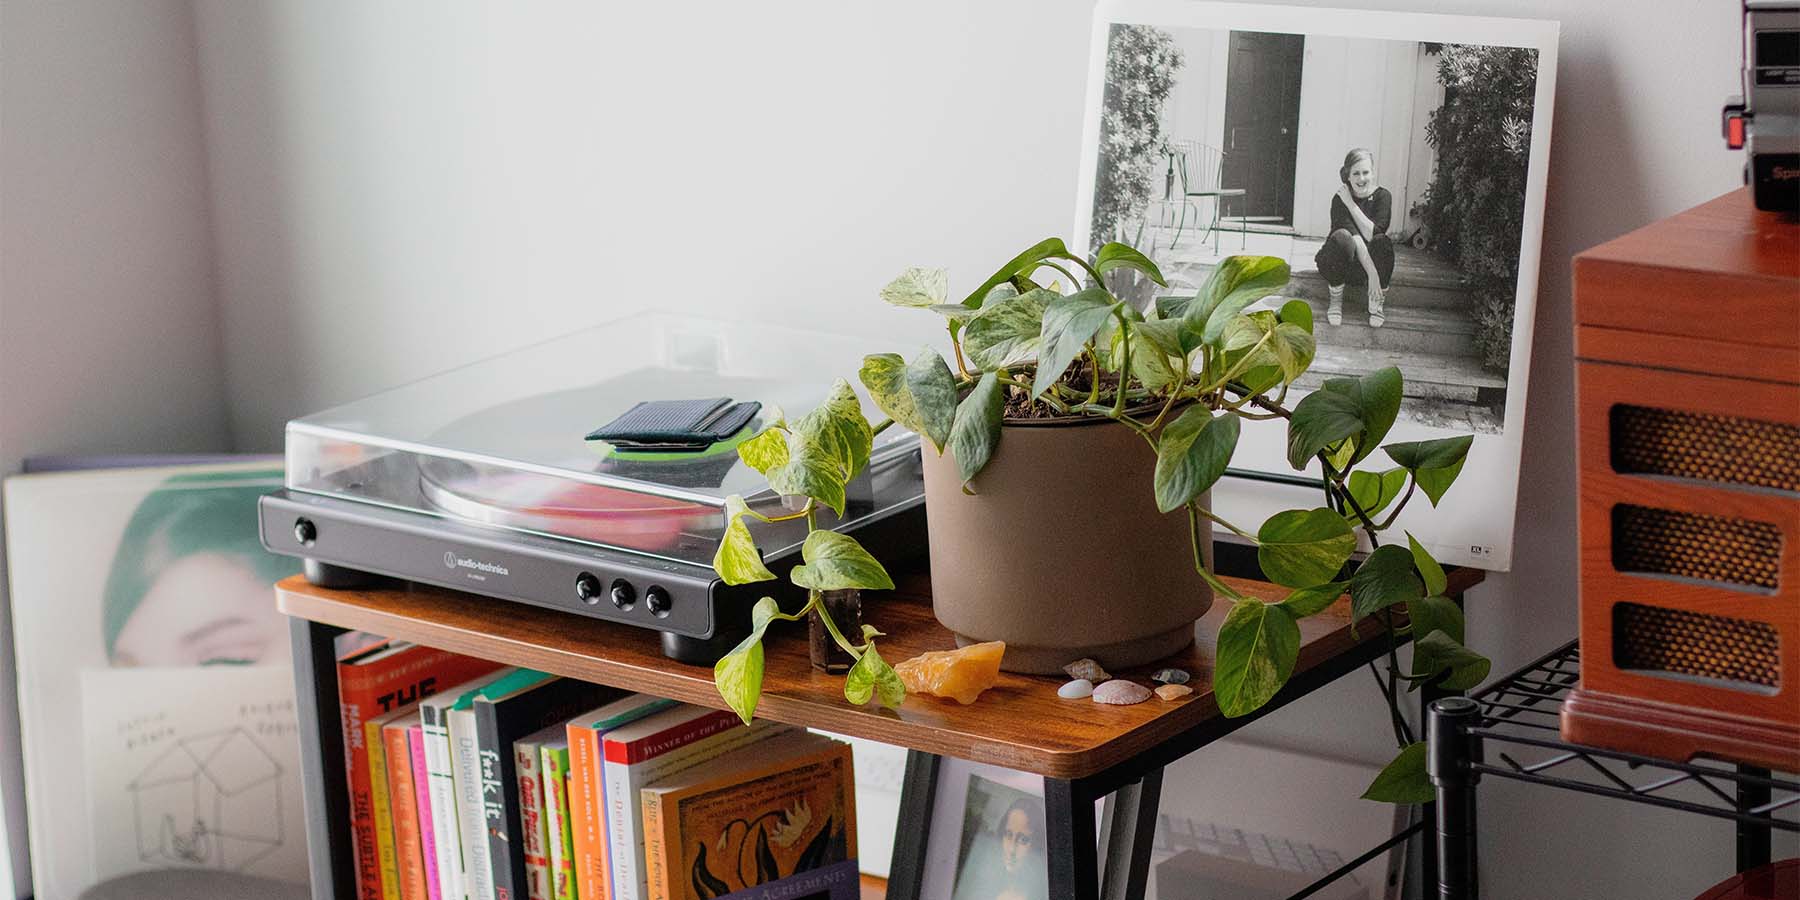 Turntable with a potted plant next to it.  There are small crystals, records, and books next to to it.